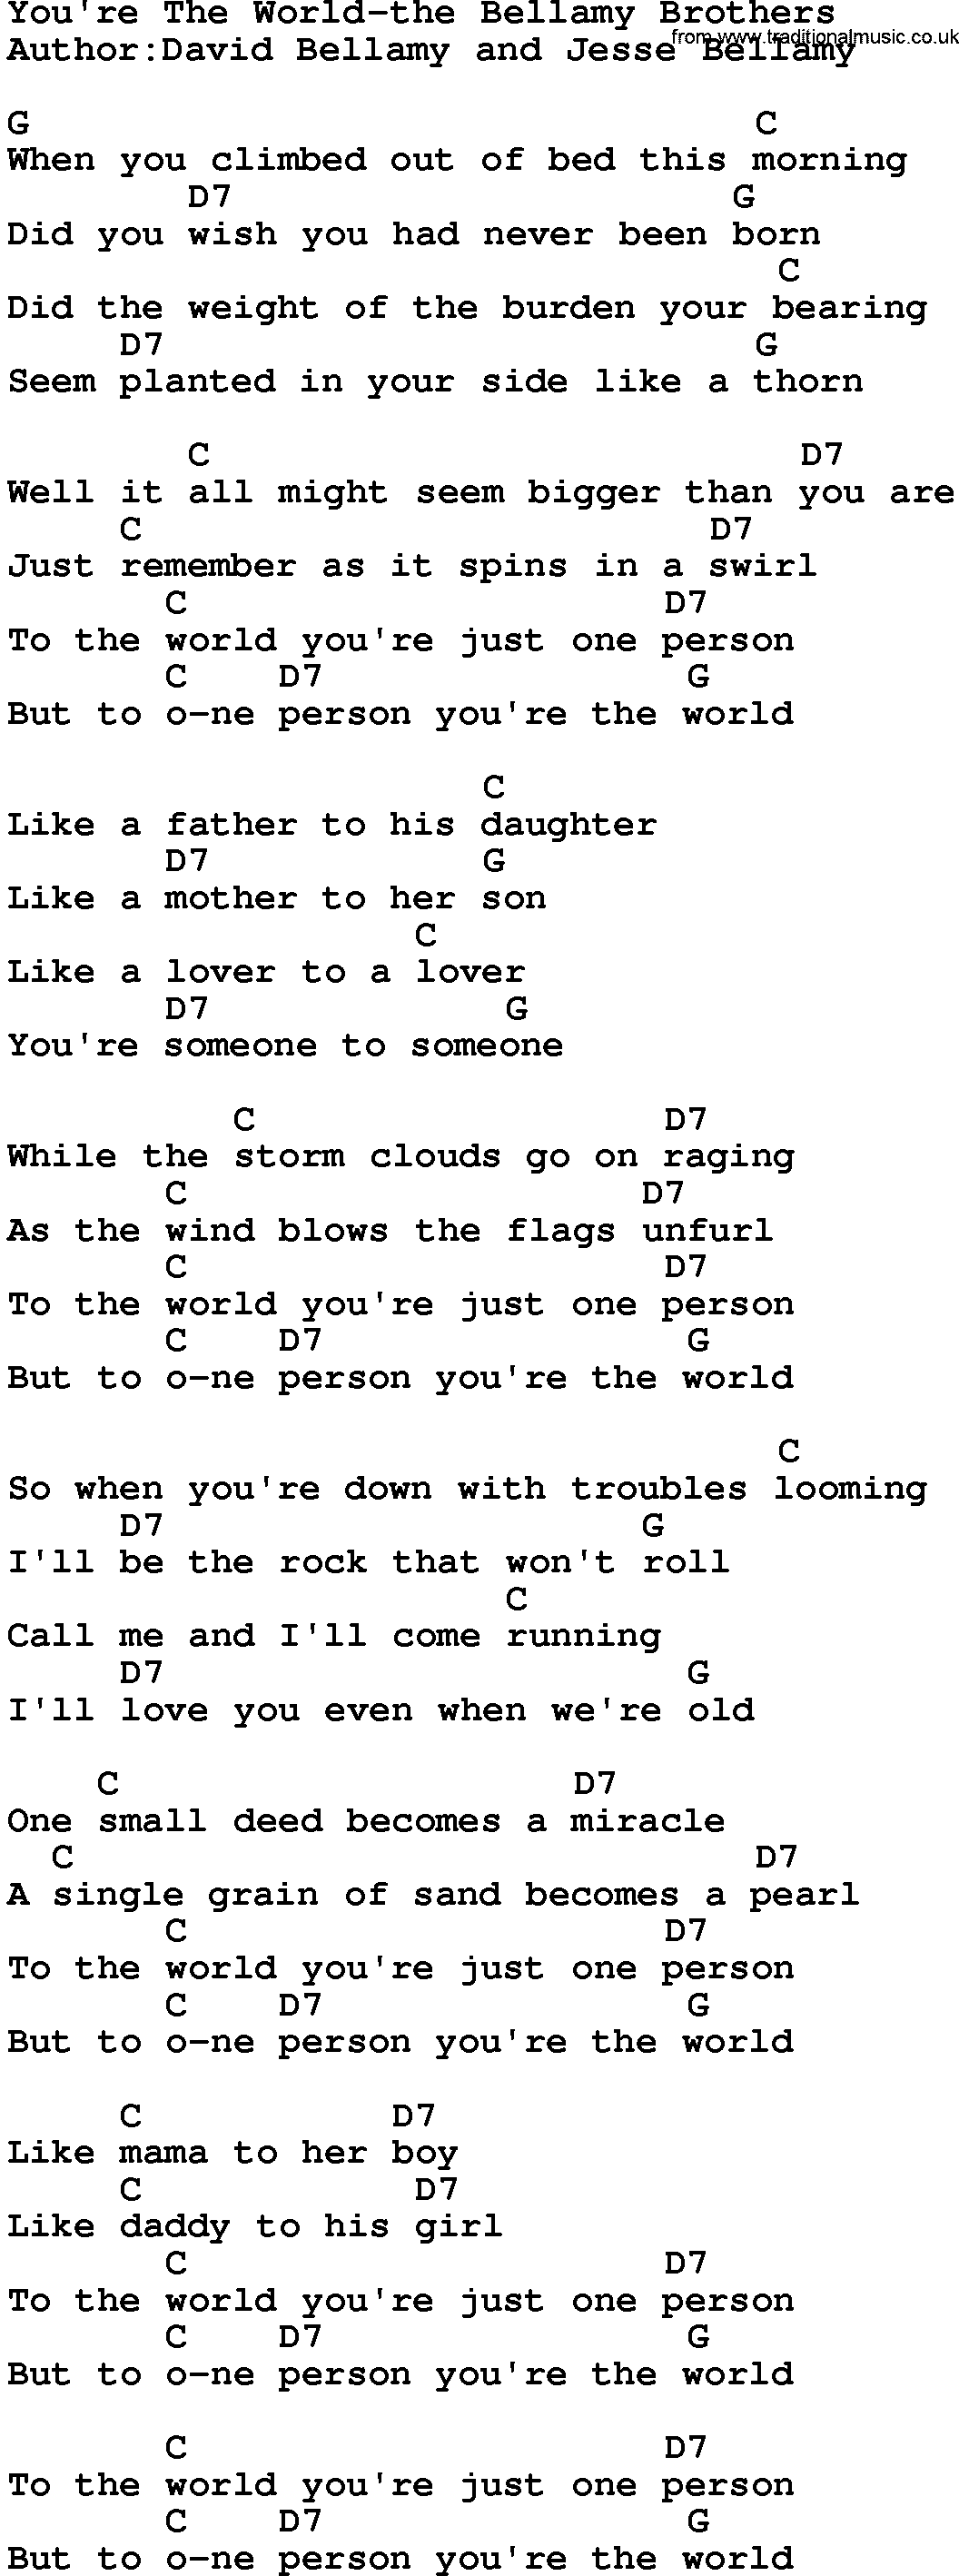 Country music song: You're The World-The Bellamy Brothers lyrics and chords